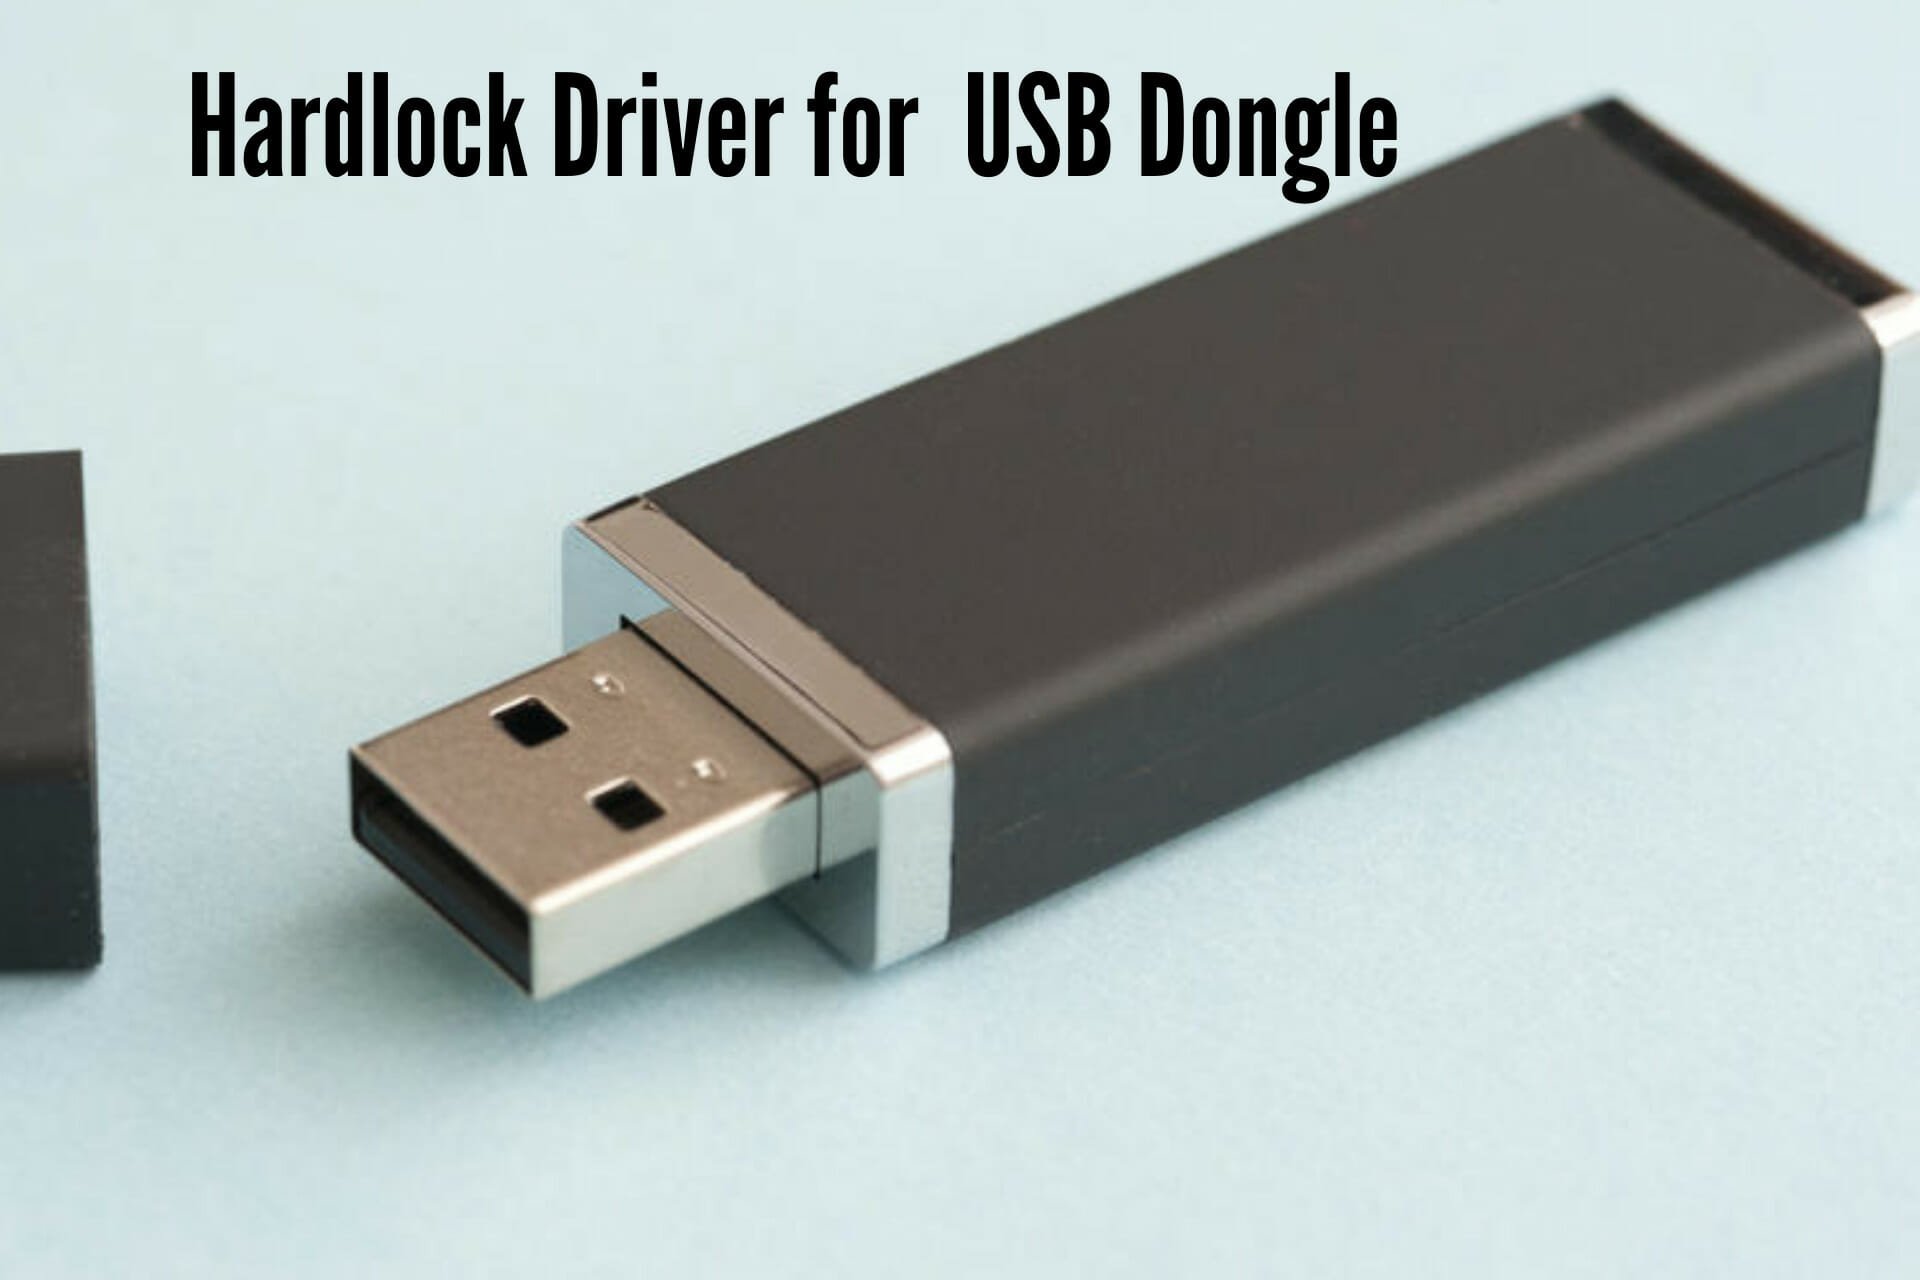 Hardlock driver for USB dongle